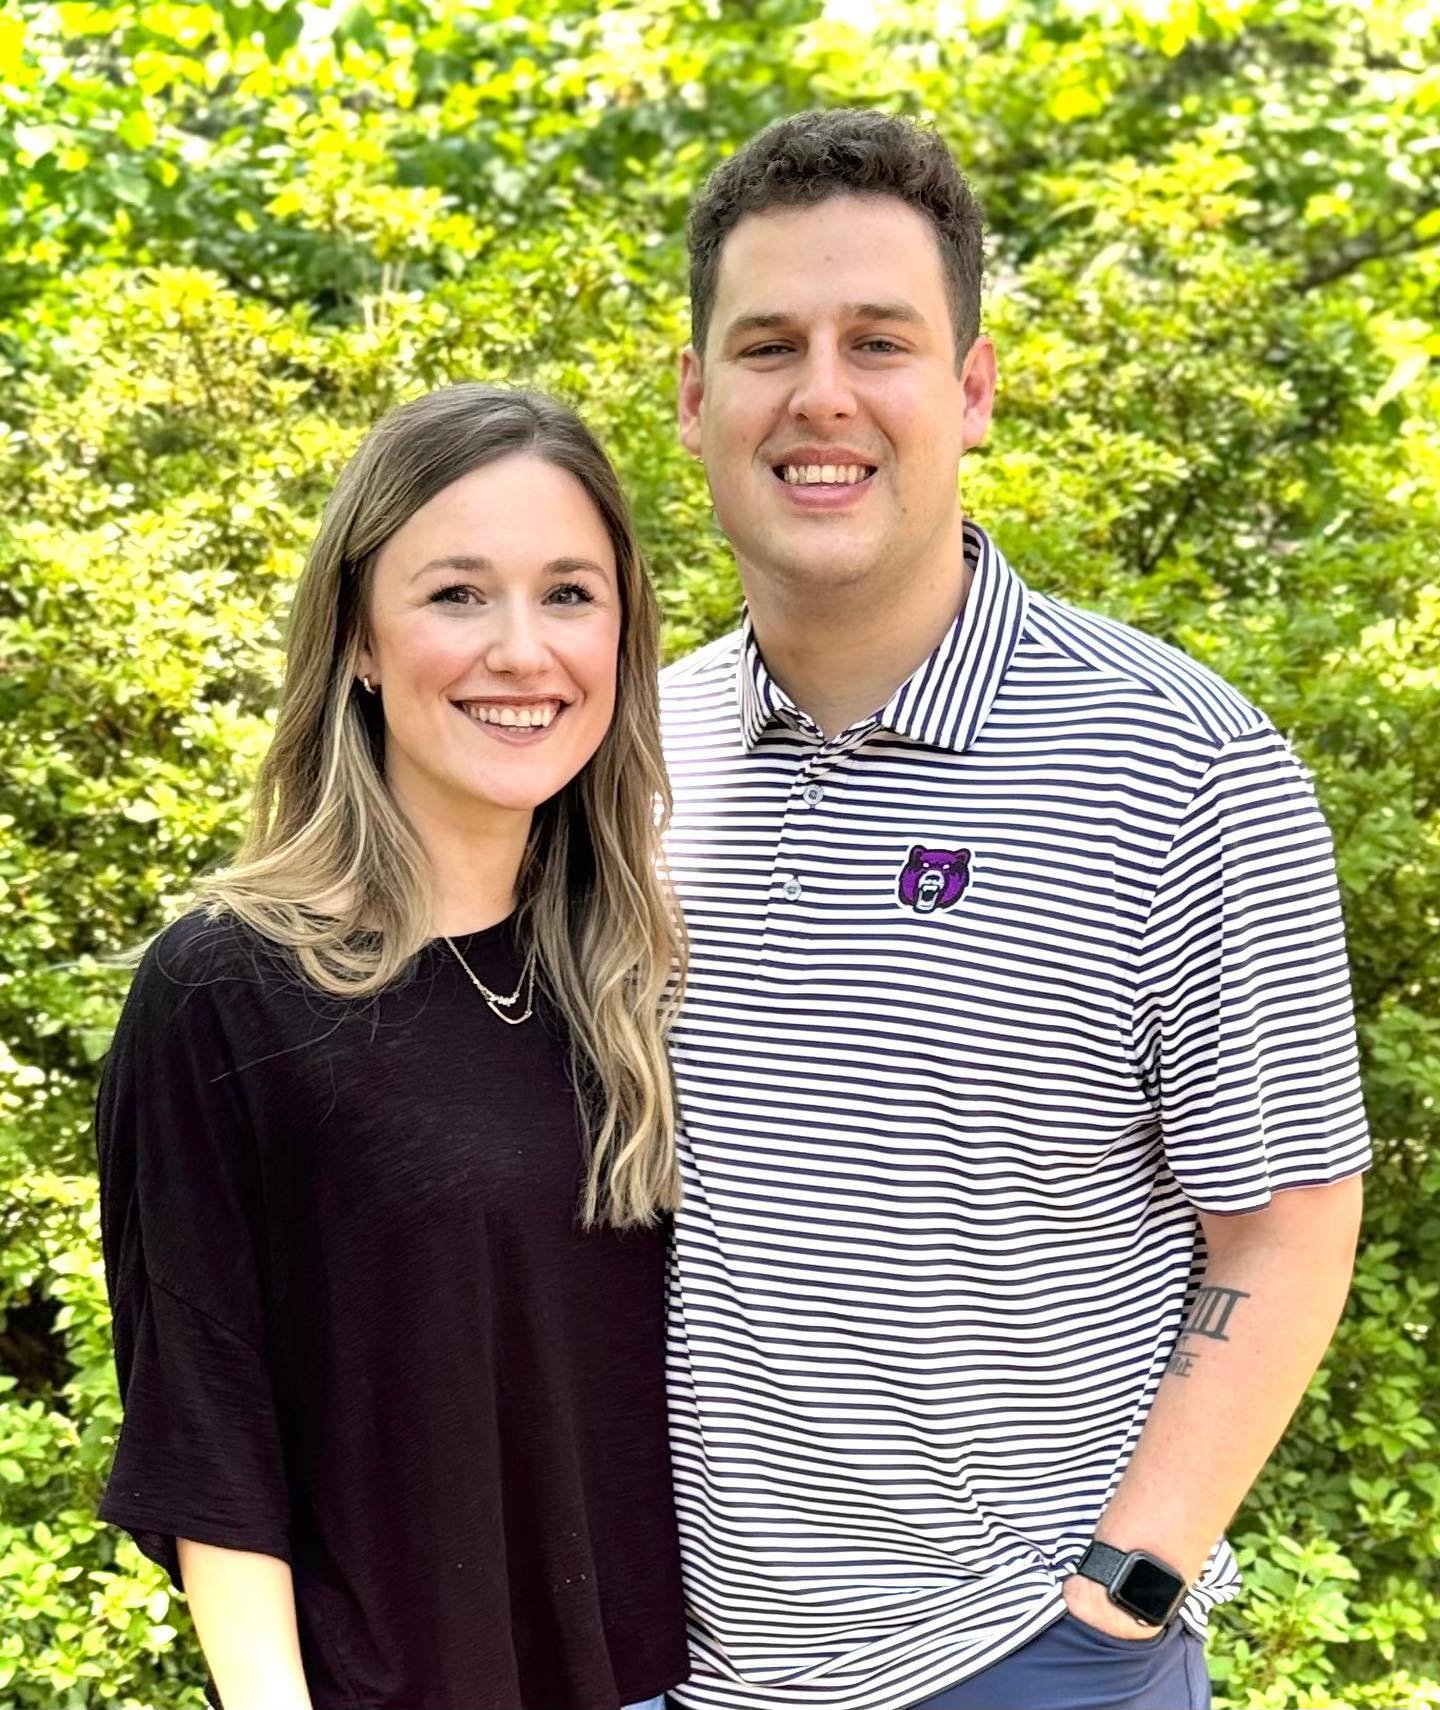 🚨WE HAVE EXCITING NEWS!!!🚨

This past week Thomas Guinee was officially voted into the role of the Conway BCM Campus Minister! Thomas and his wife Hannah are so excited to move to Conway to begin serving students at the beginning of June!

Thomas g